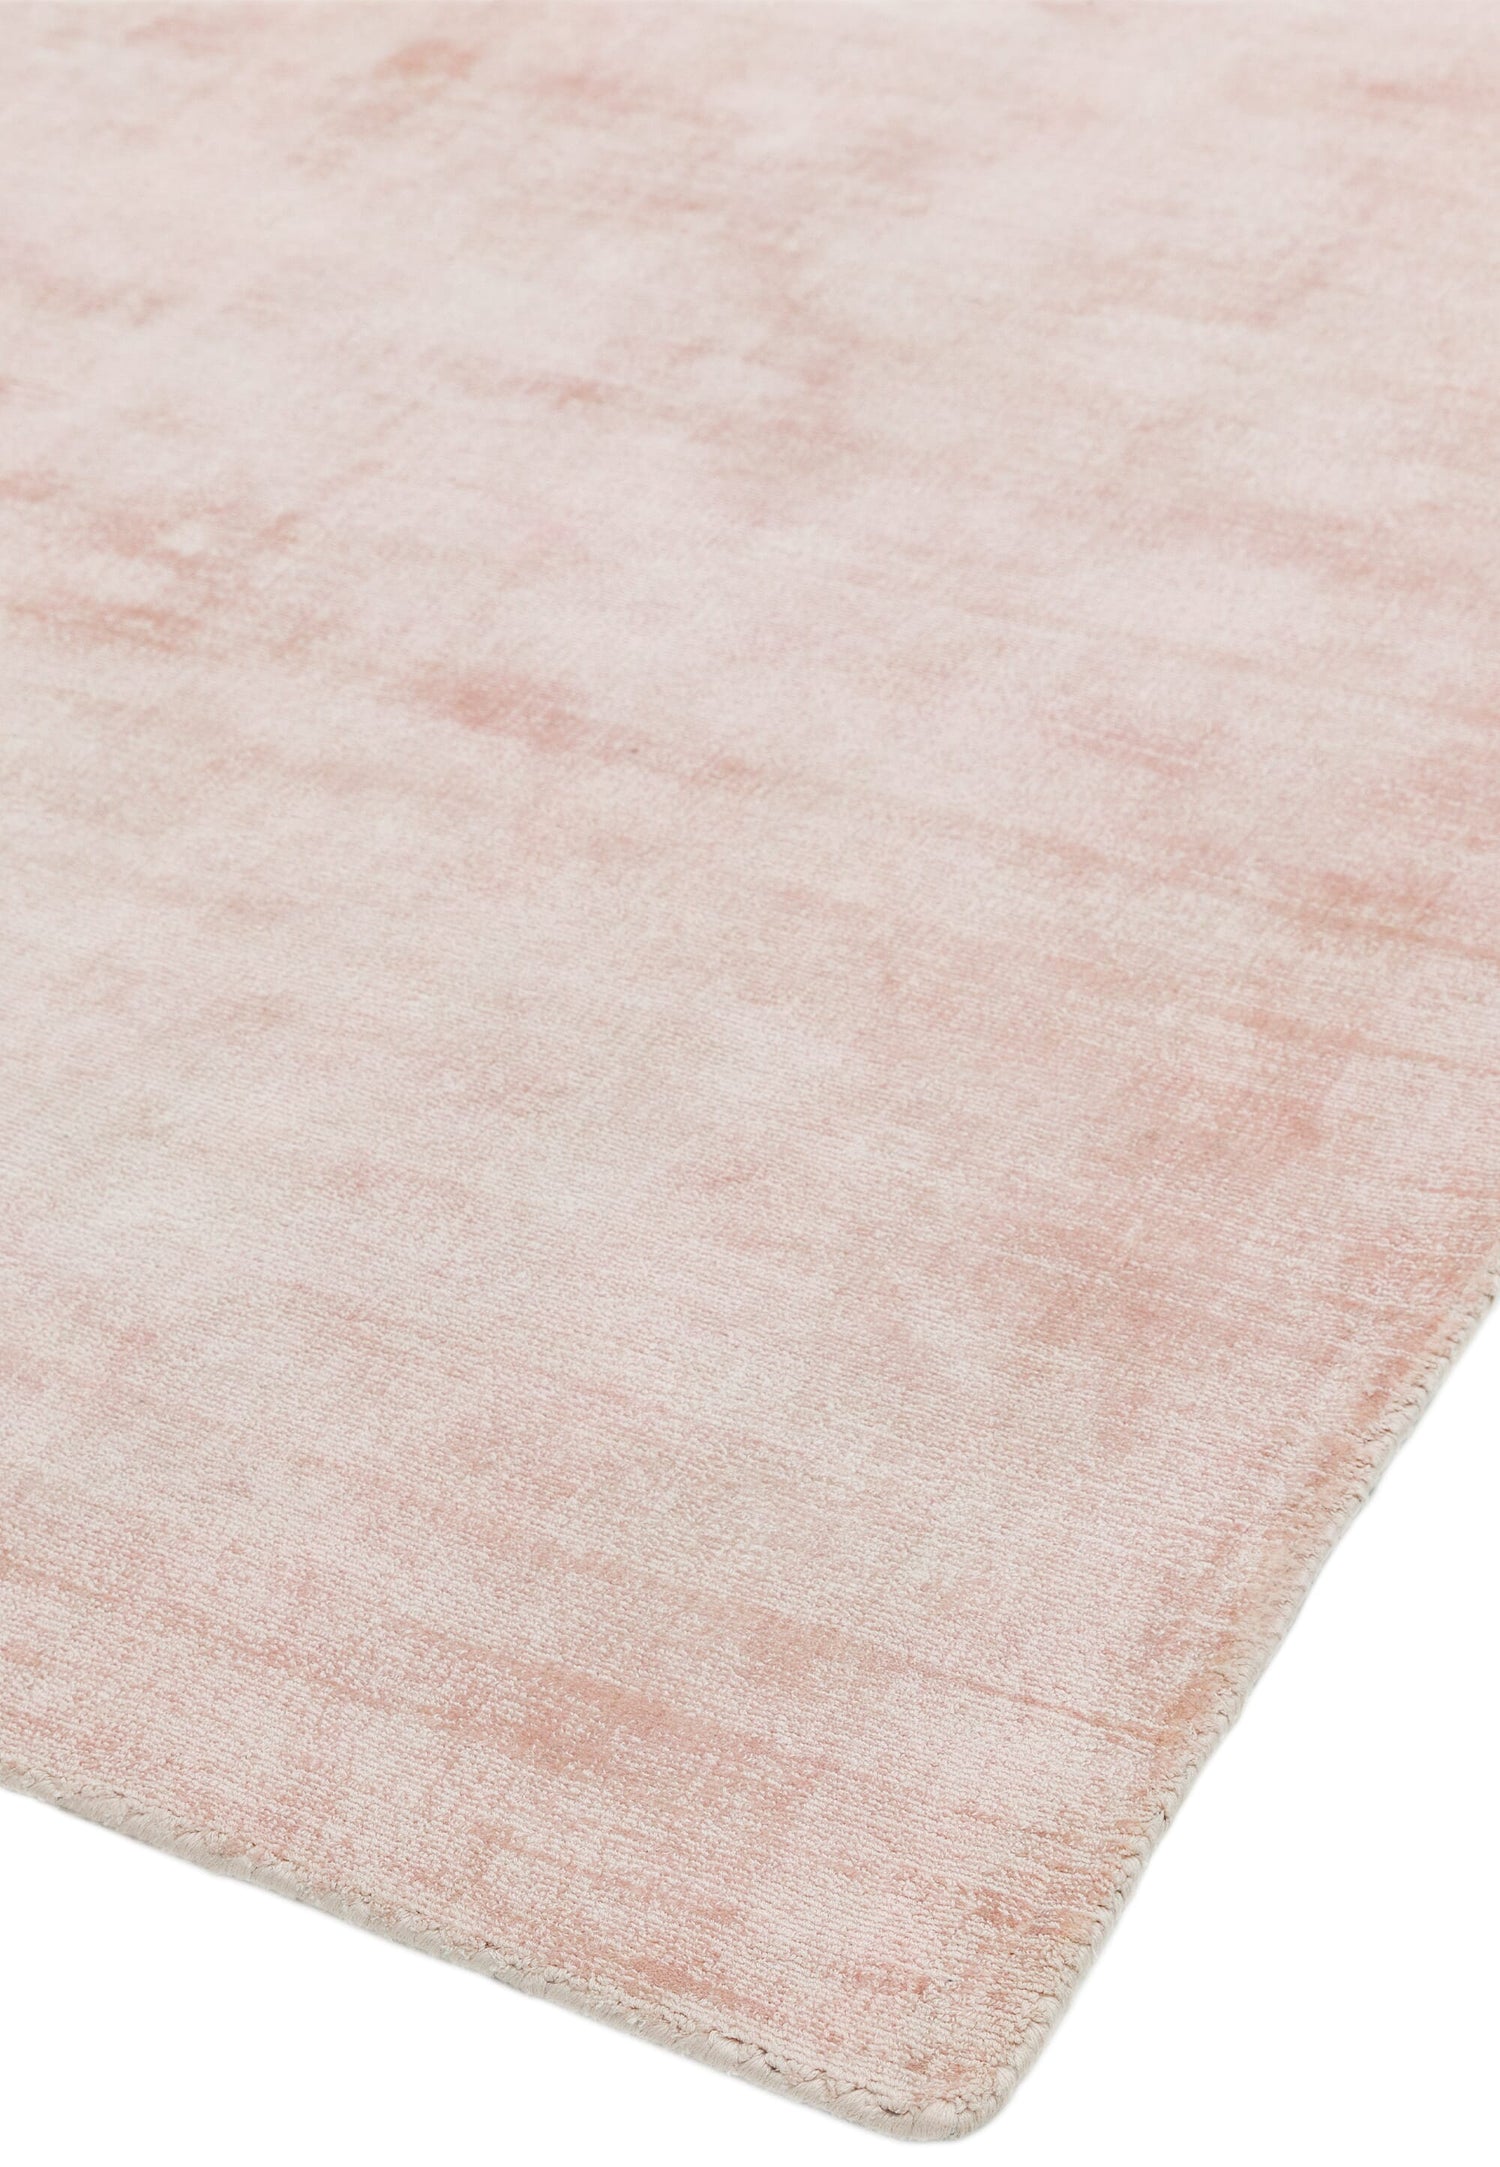  Asiatic Carpets-Asiatic Carpets Blade Hand Woven Rug Pink - 120 x 170cm-Pink 189 